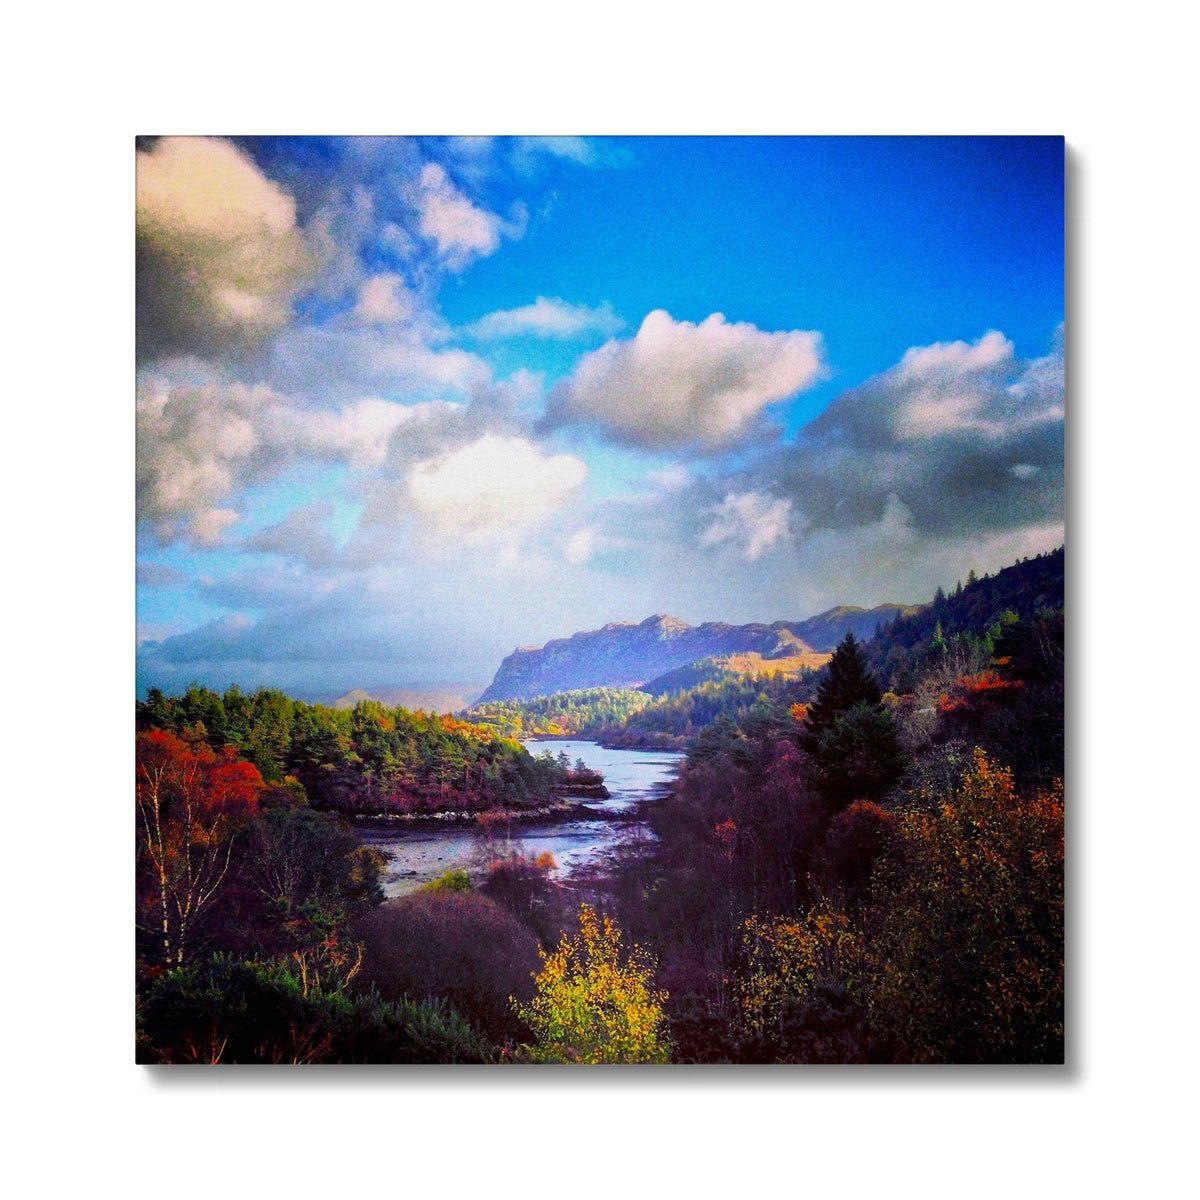 Plockton Scottish Highlands Painting | Canvas From Scotland-Contemporary Stretched Canvas Prints-Scottish Highlands & Lowlands Art Gallery-24"x24"-Paintings, Prints, Homeware, Art Gifts From Scotland By Scottish Artist Kevin Hunter